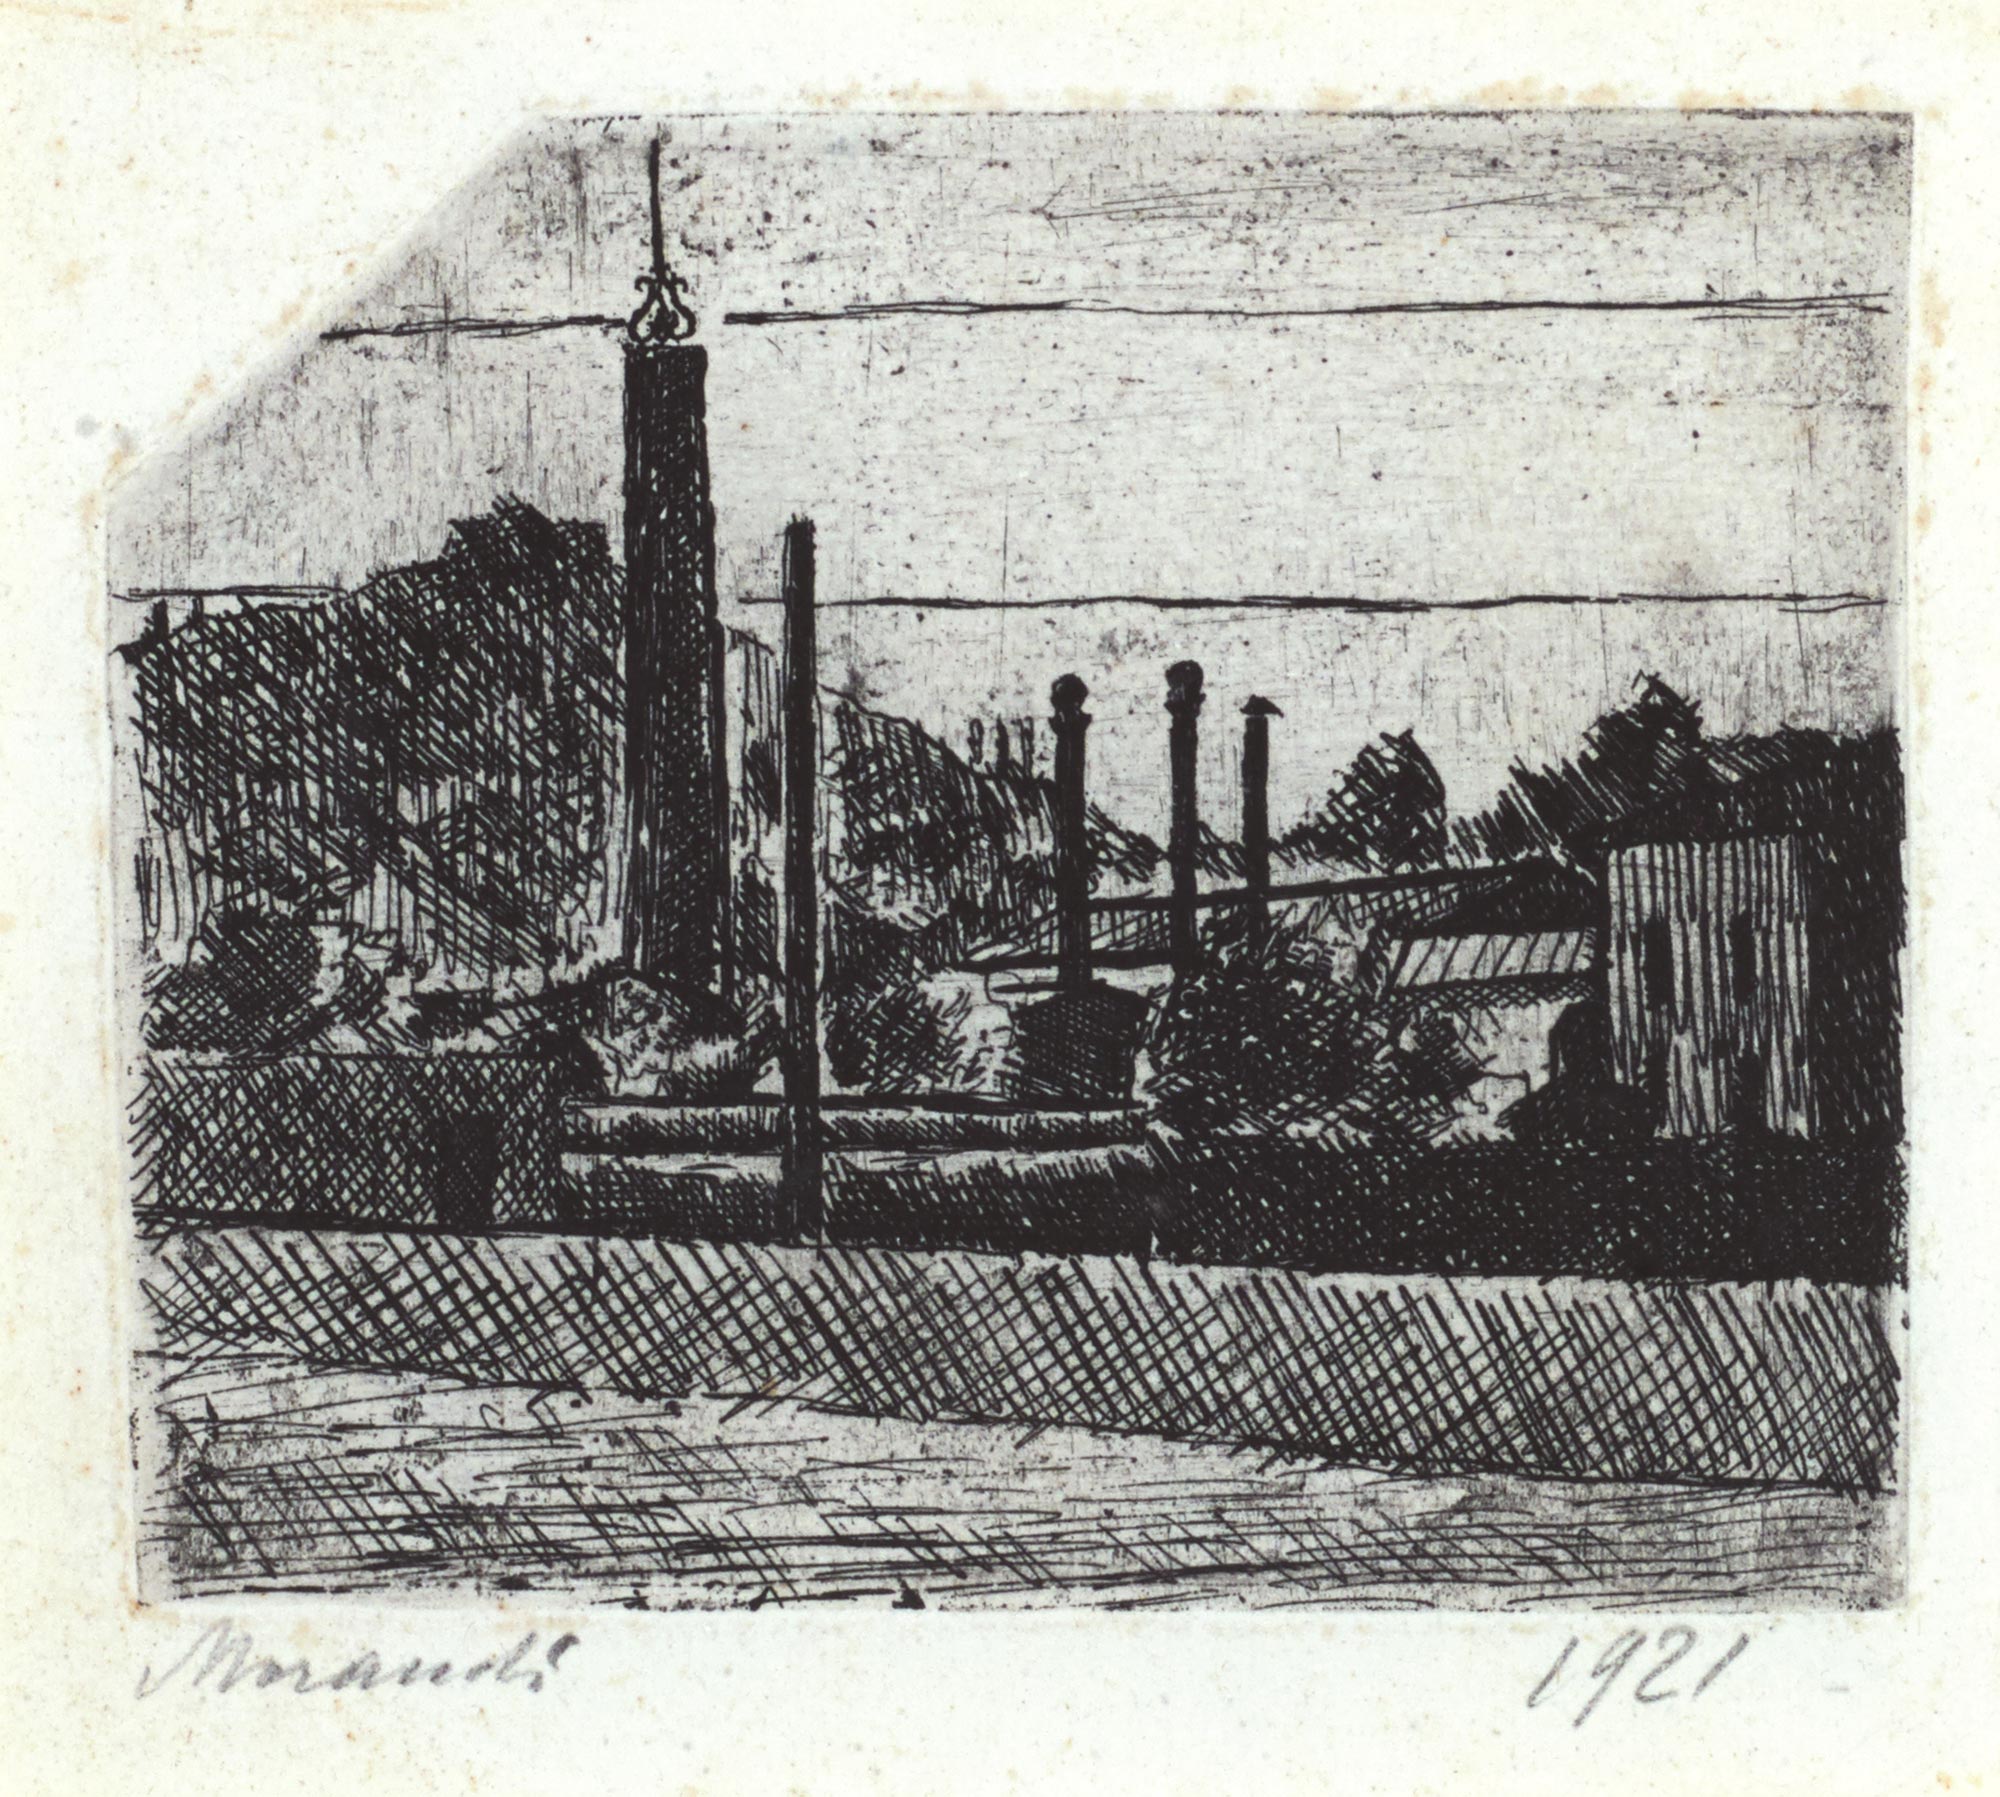 Giorgio Morandi, Landscape (The Chimneys of the Arsenal on the Outskirts of Bologna), 1921